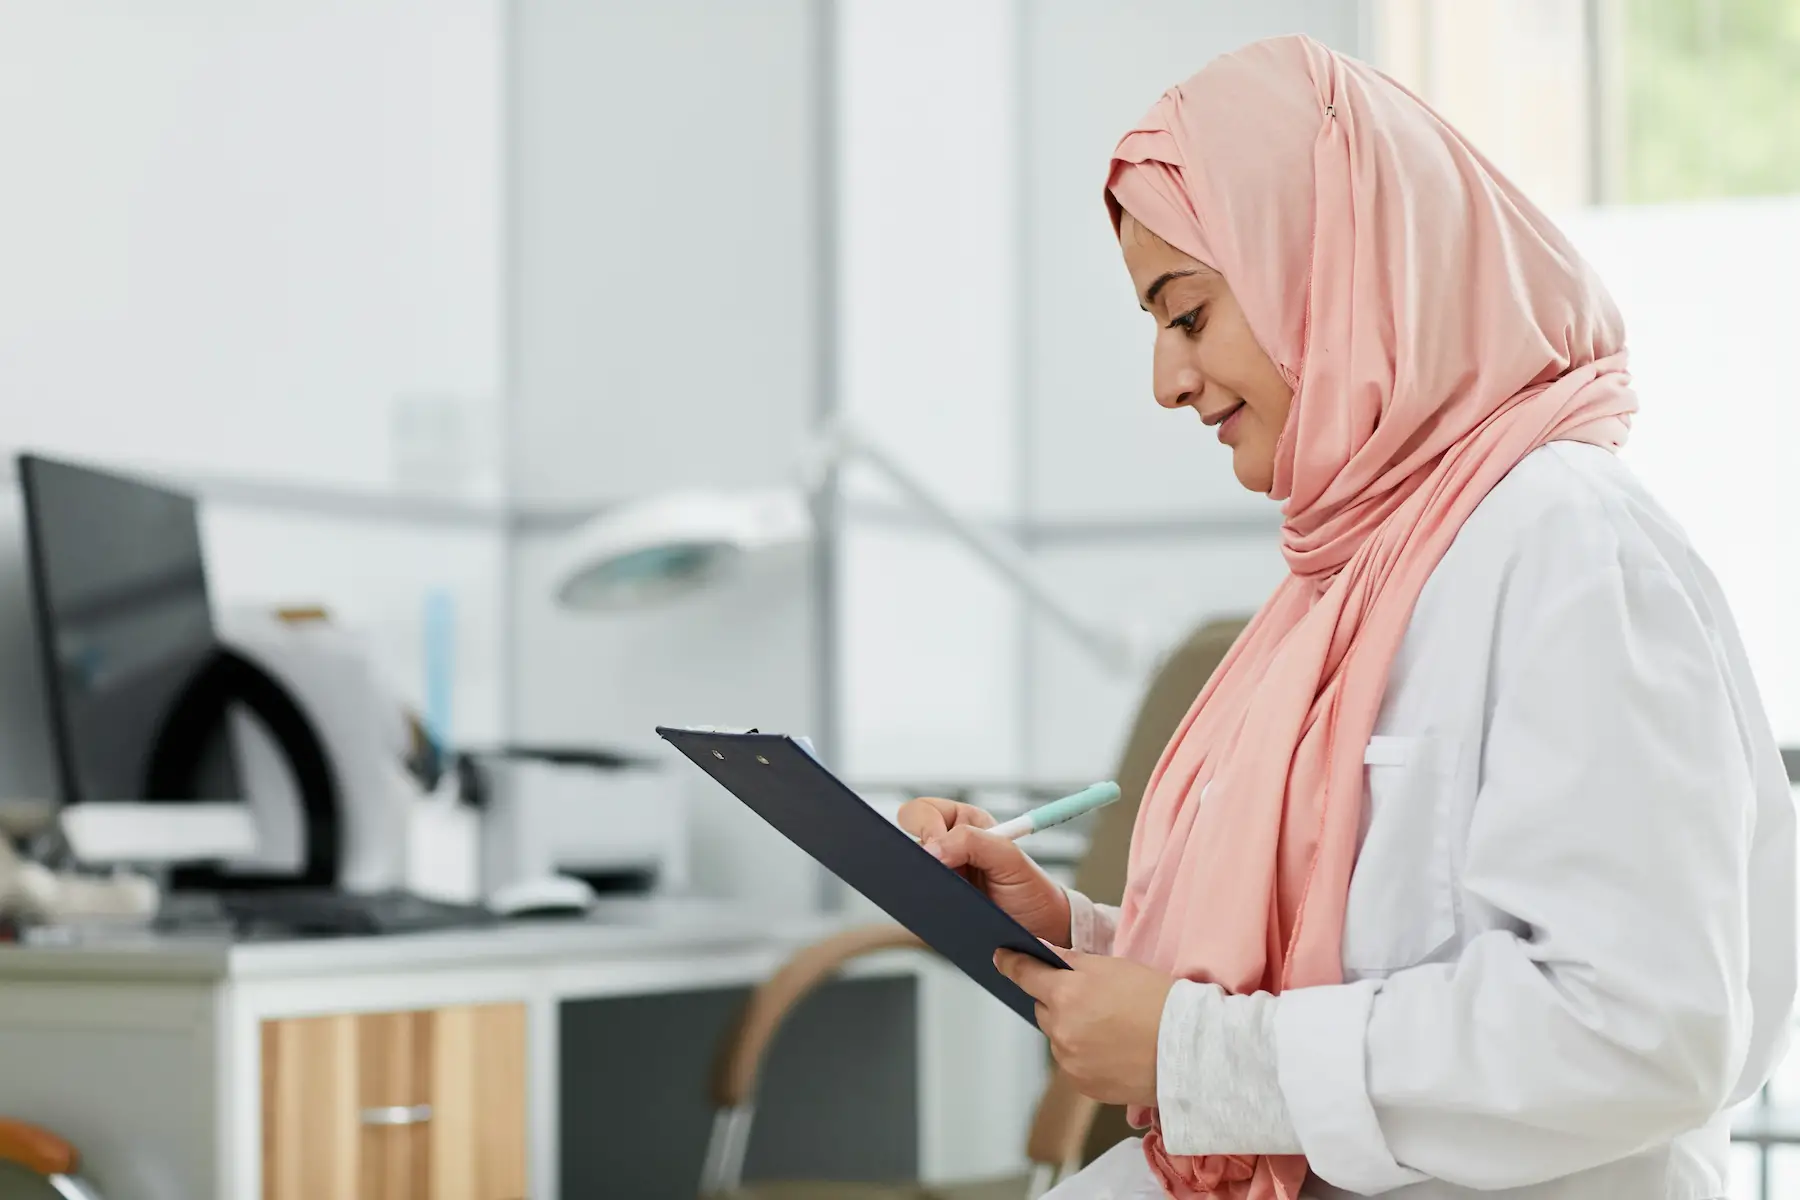 Female Muslim doctor wearing a hijab looking at a patient's chart.